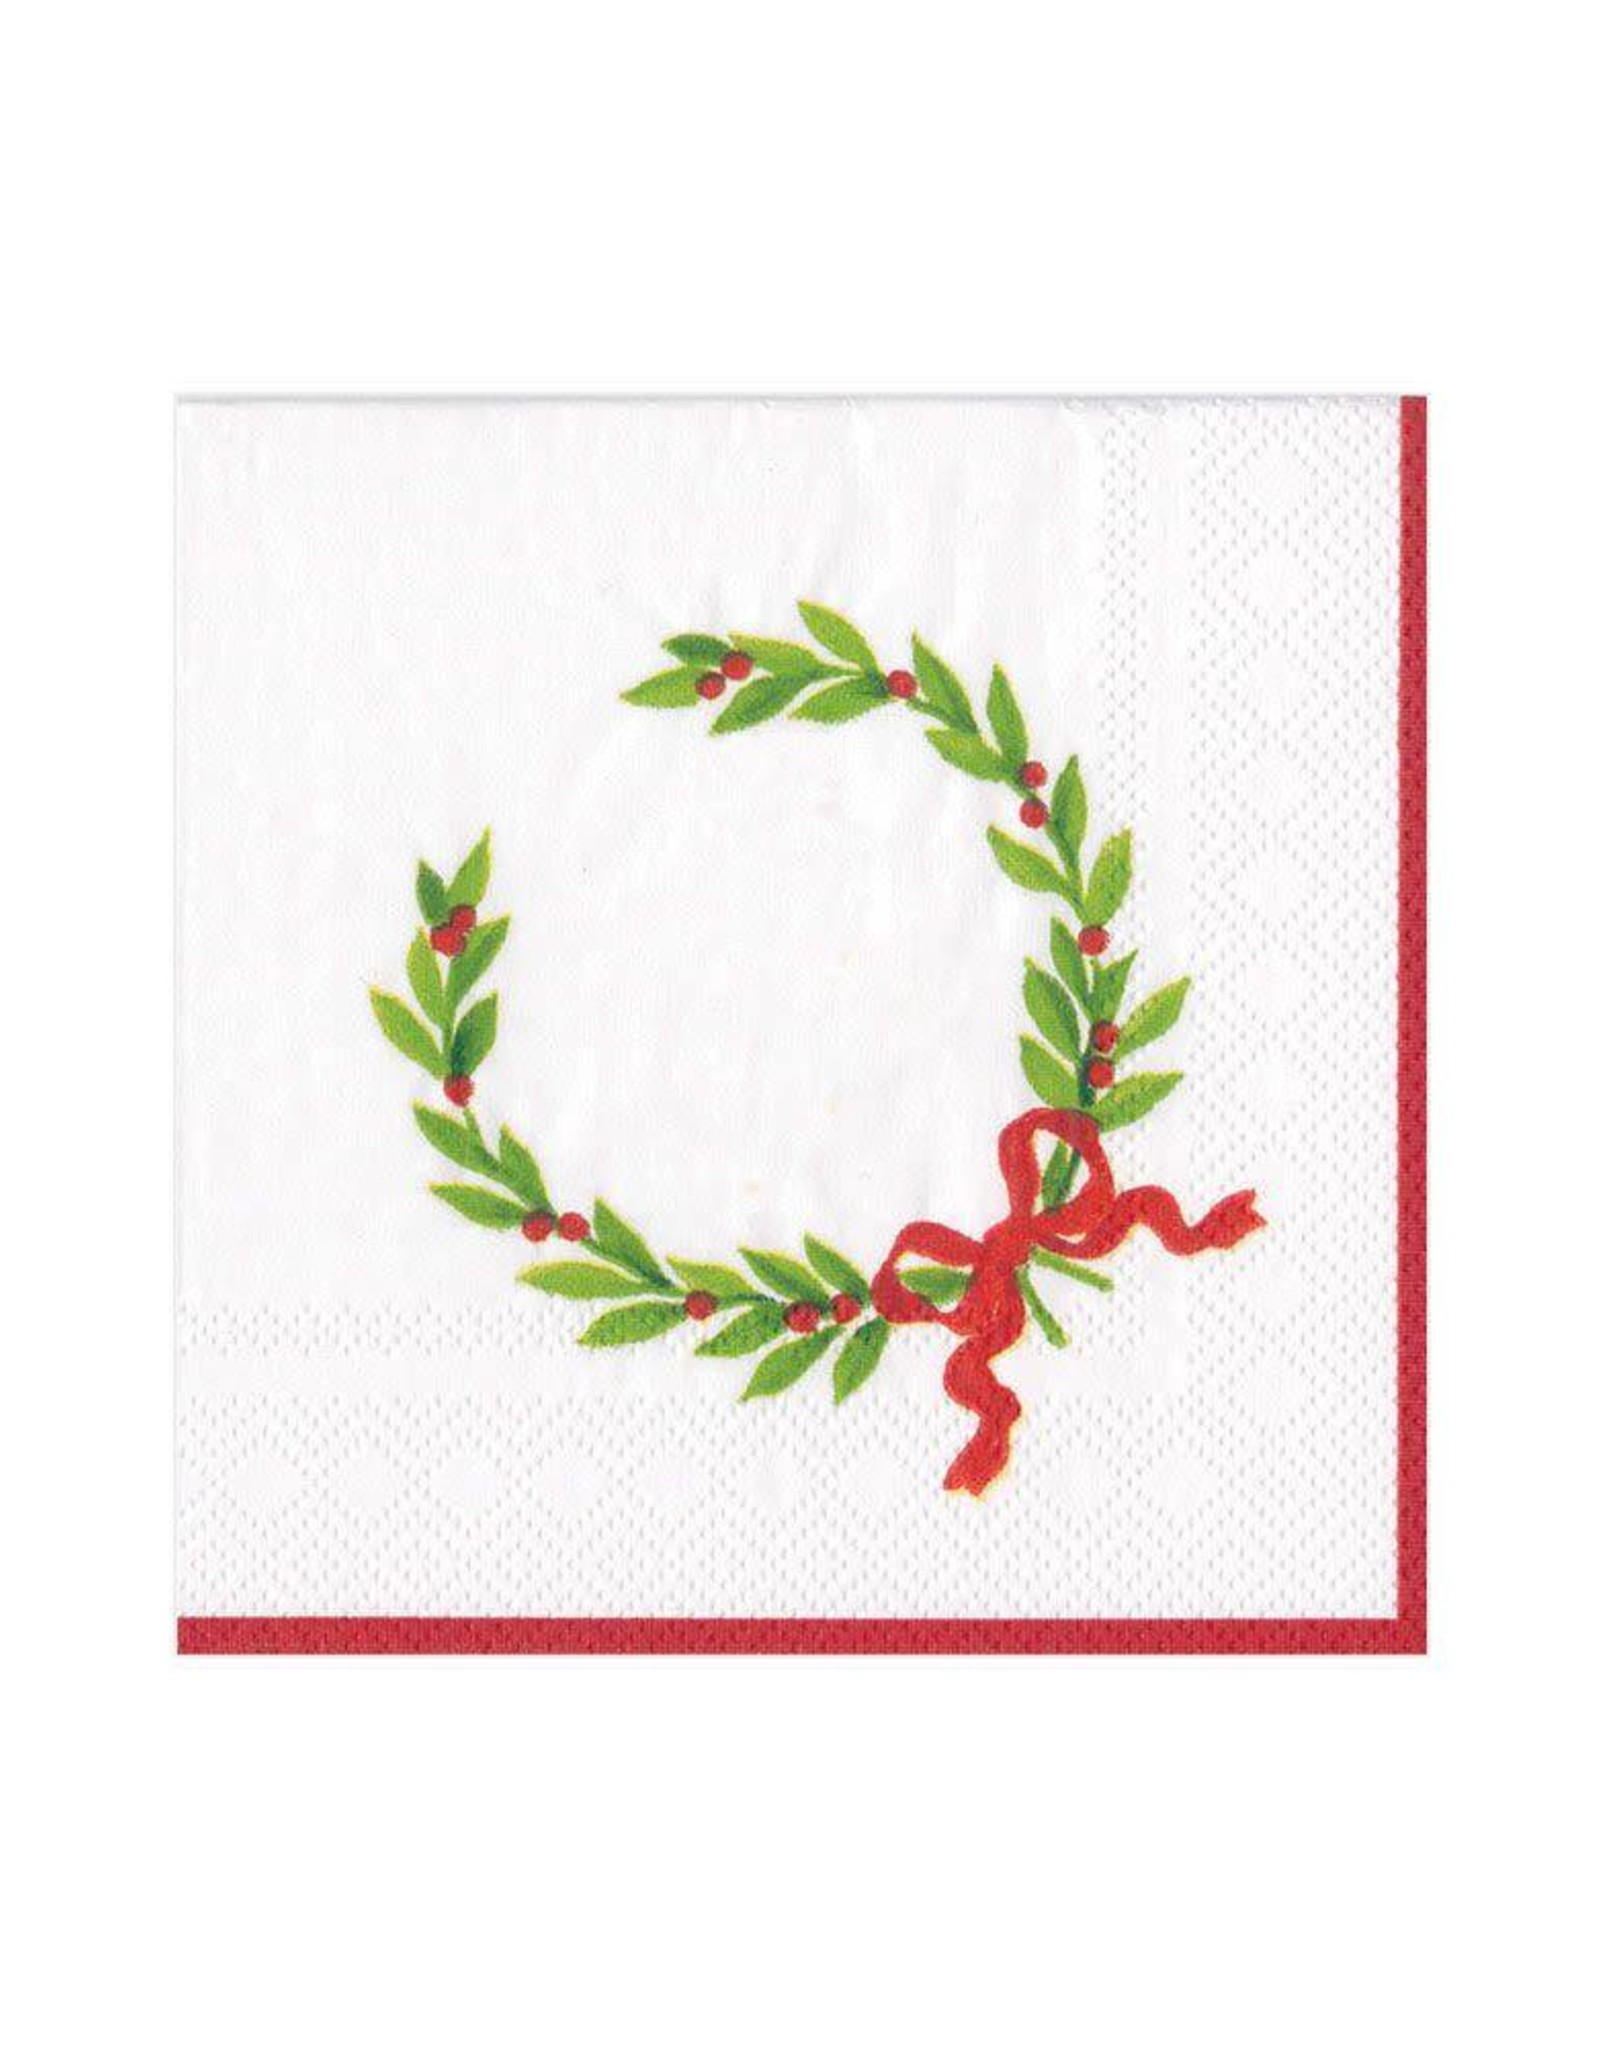 Christmas Laurel Wreath with Initial "A" Beverage Napkin (20ct)